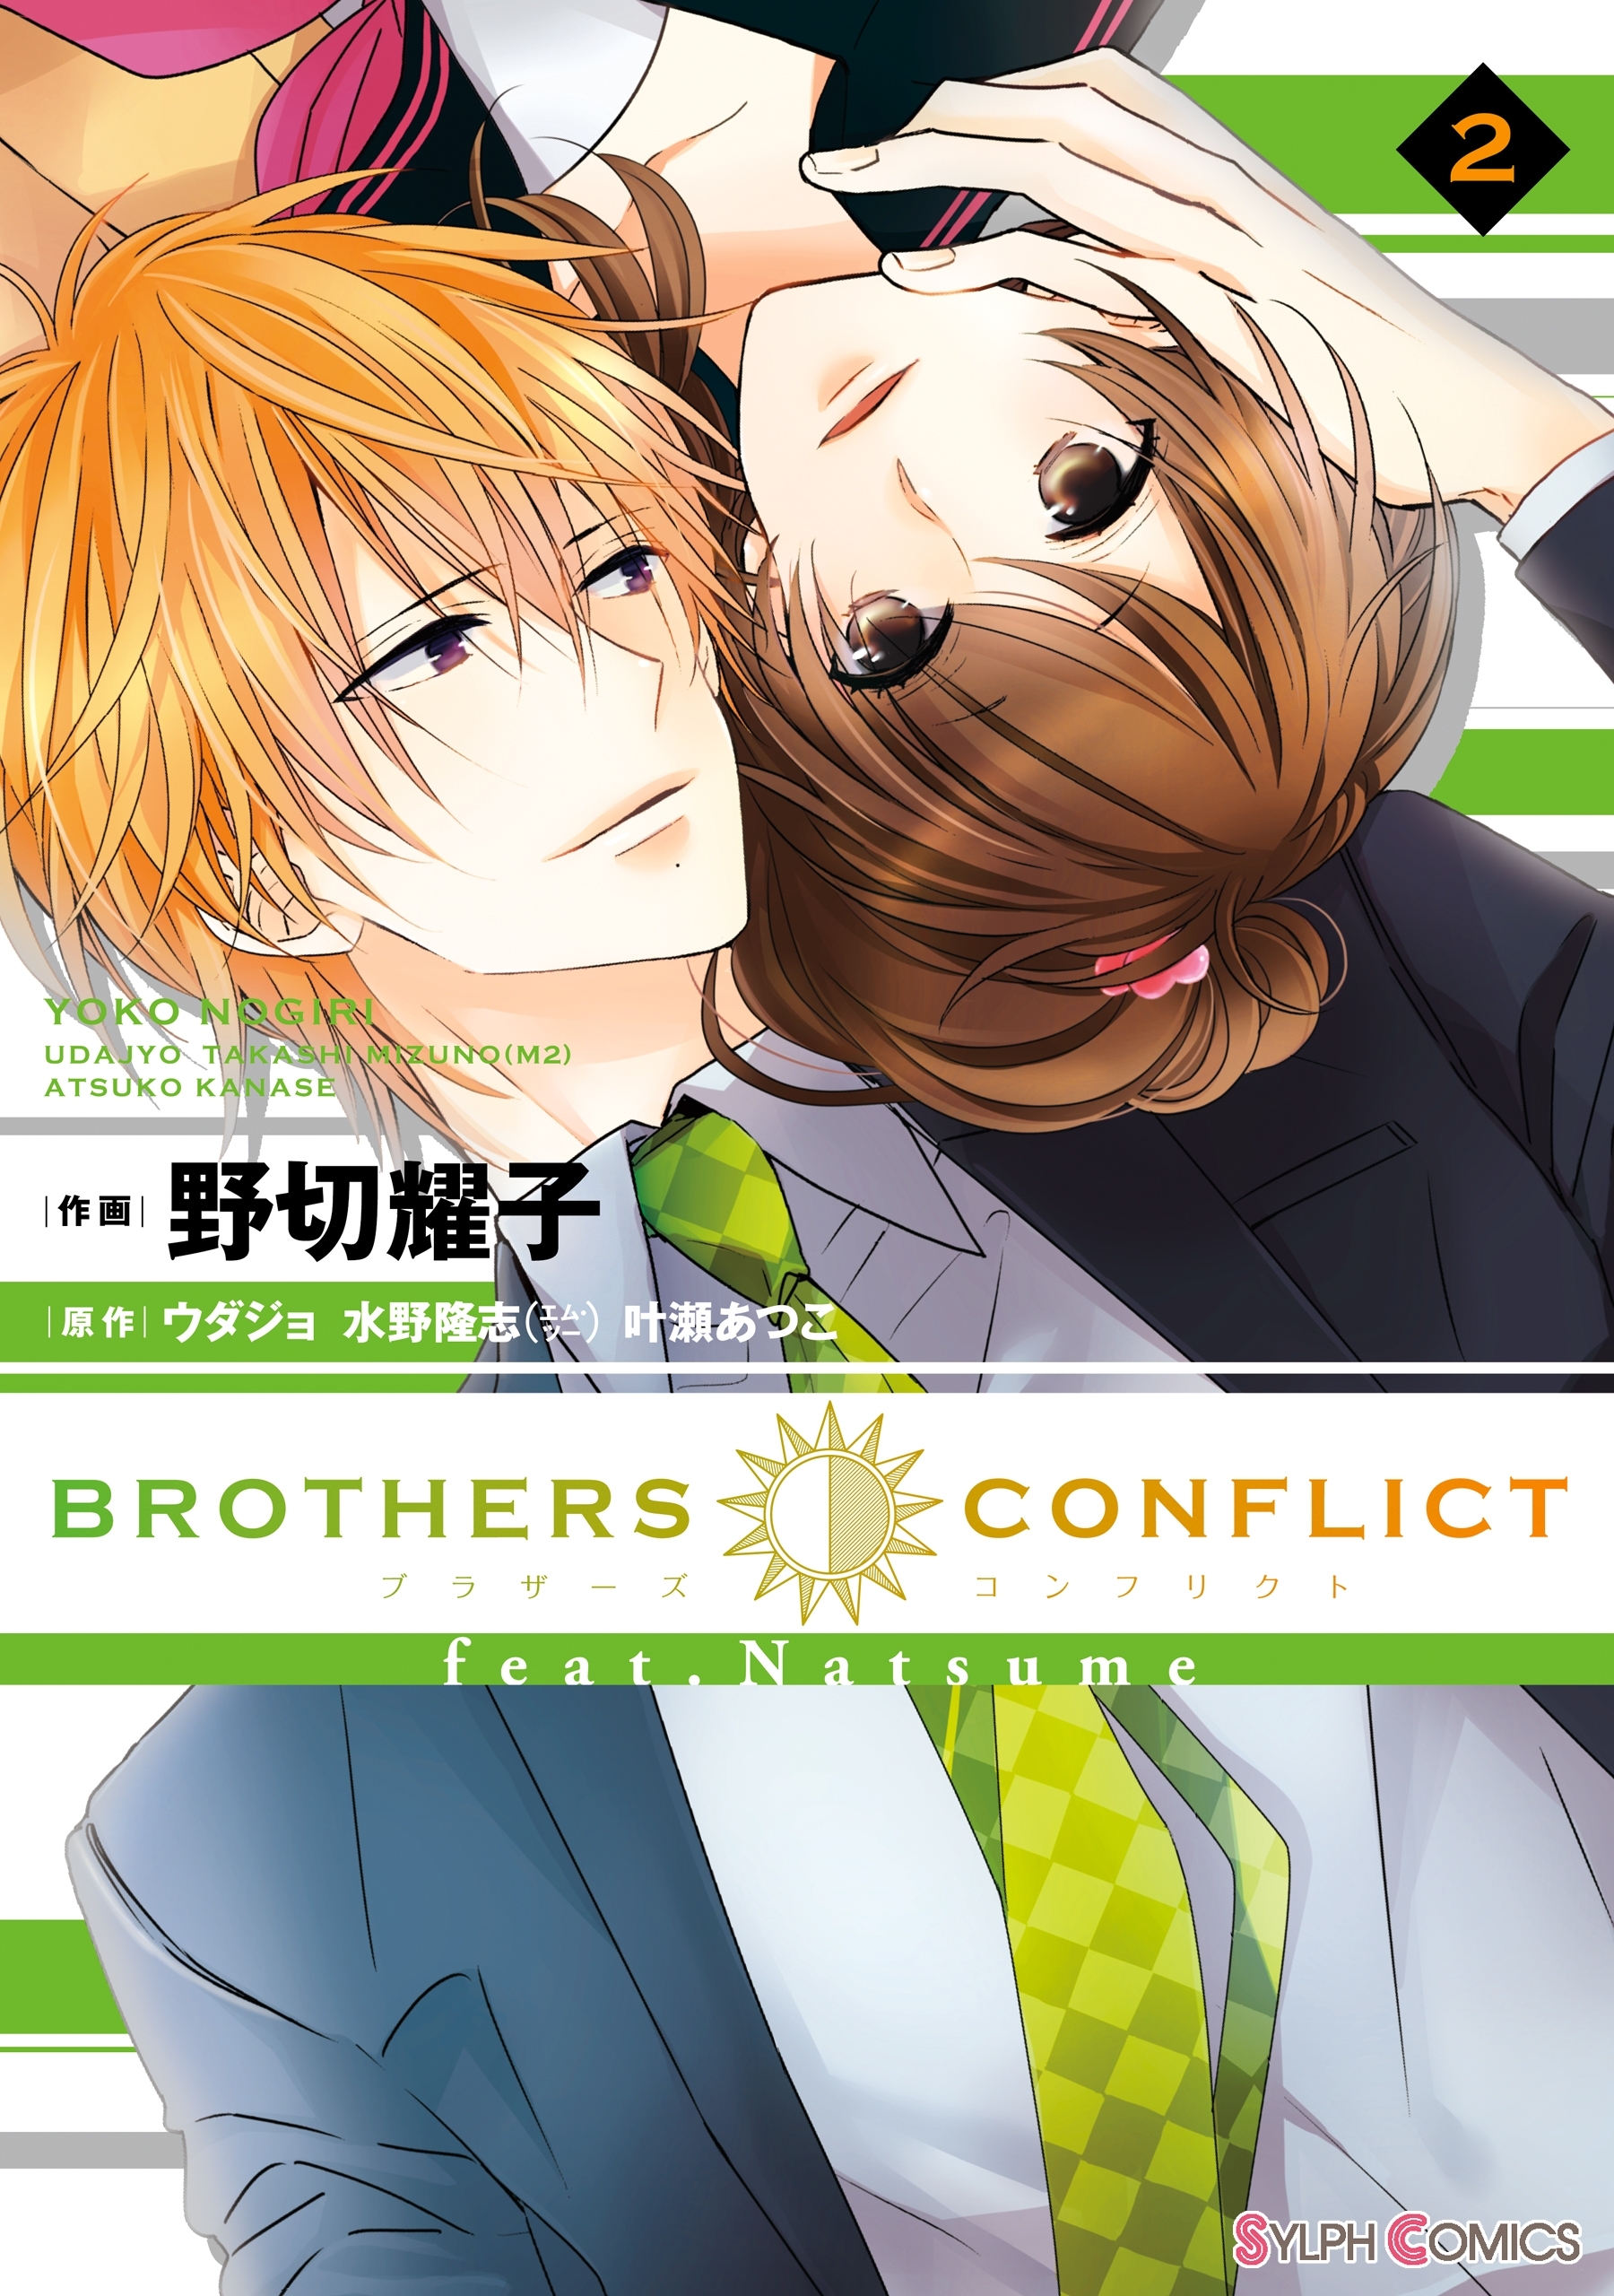 Brothers Conflict Feat Natsume 無料 試し読みなら Amebaマンガ 旧 読書のお時間です